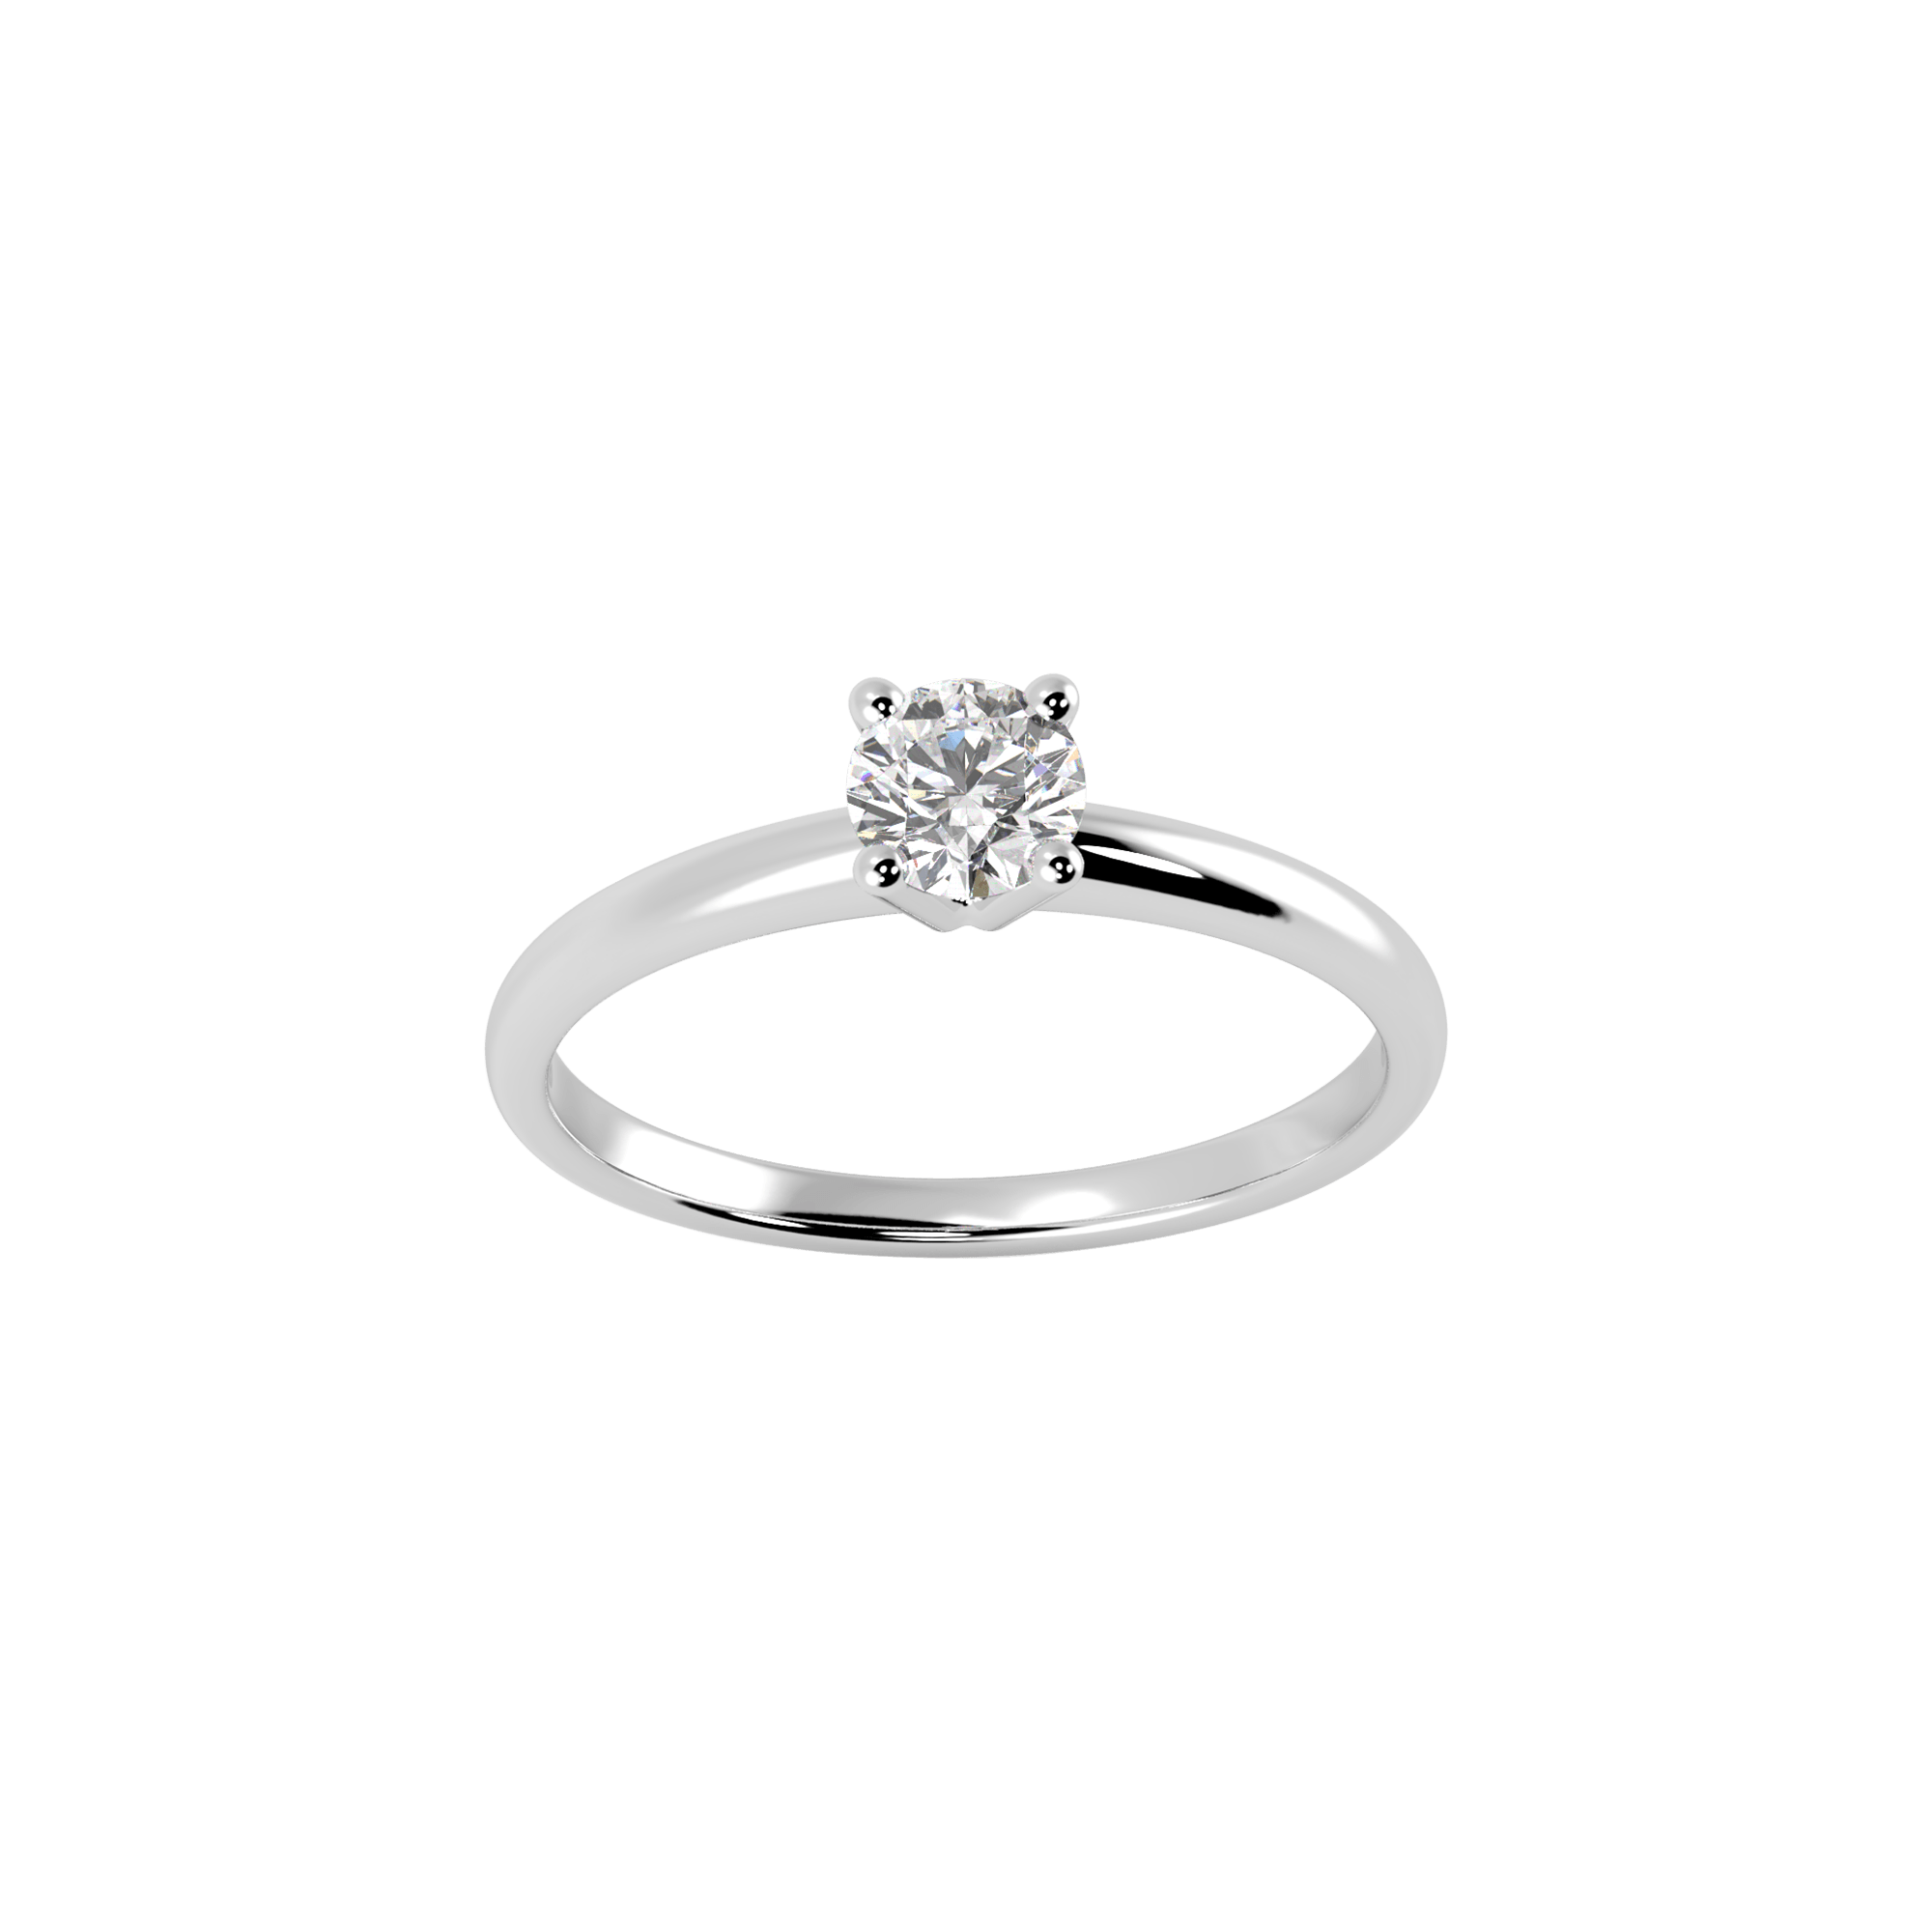 Lab-Grown Diamond Solitaire Ring | 18K white gold / 5.5 / 0.2ct  | Jewelry | The Future Rocks